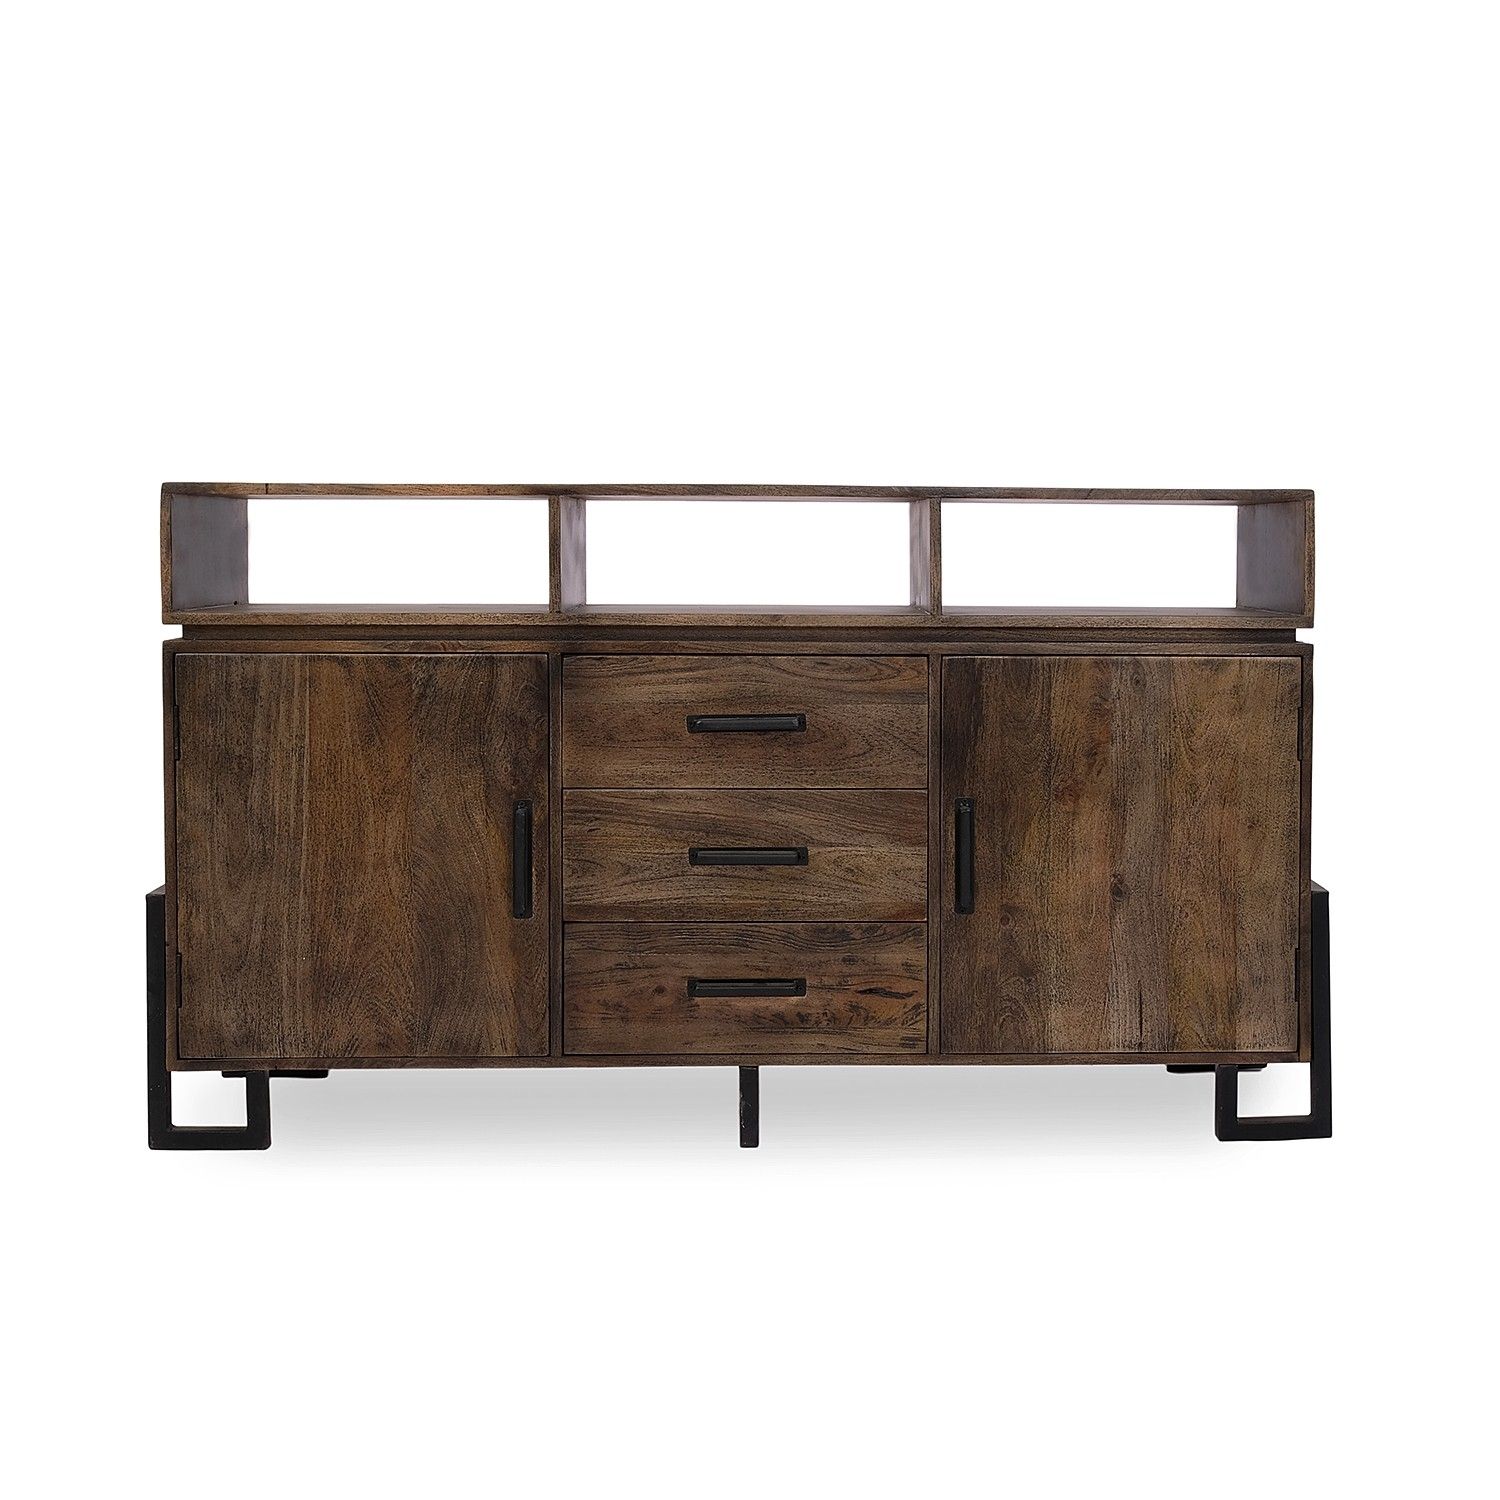 Metal & Wood Sideboard | The Yellow Door Store Pertaining To 2017 Natural Mango Wood Finish Sideboards (View 20 of 20)